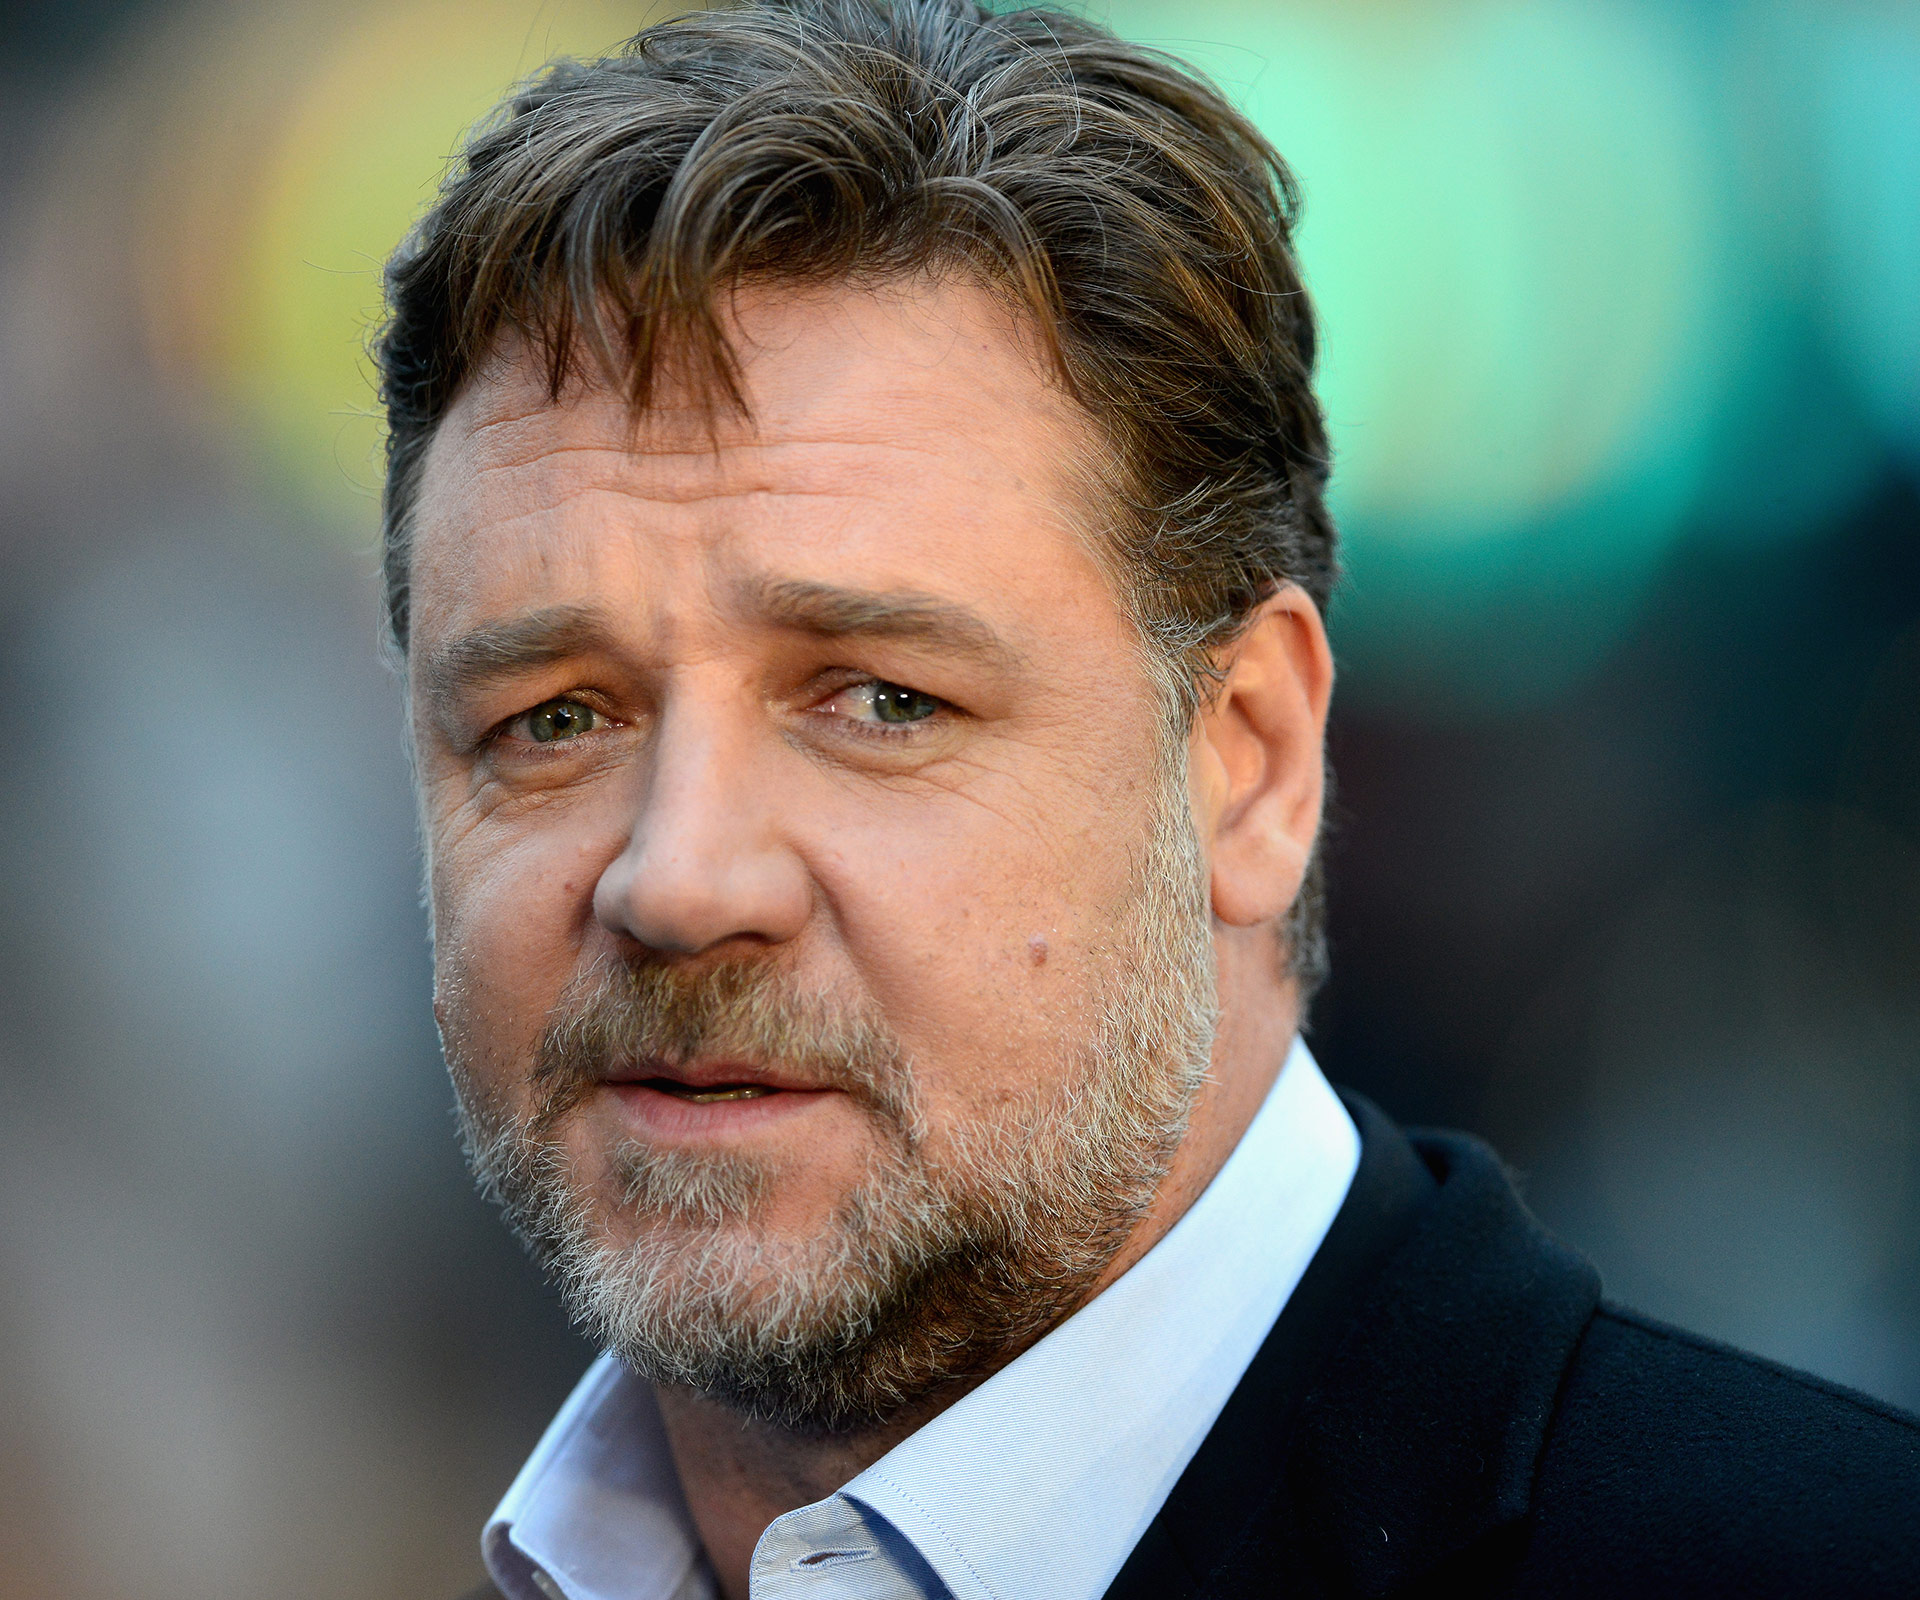 “It’s just something he liked to do”: Russell Crowe relives getting pranked called by Michael Jackson